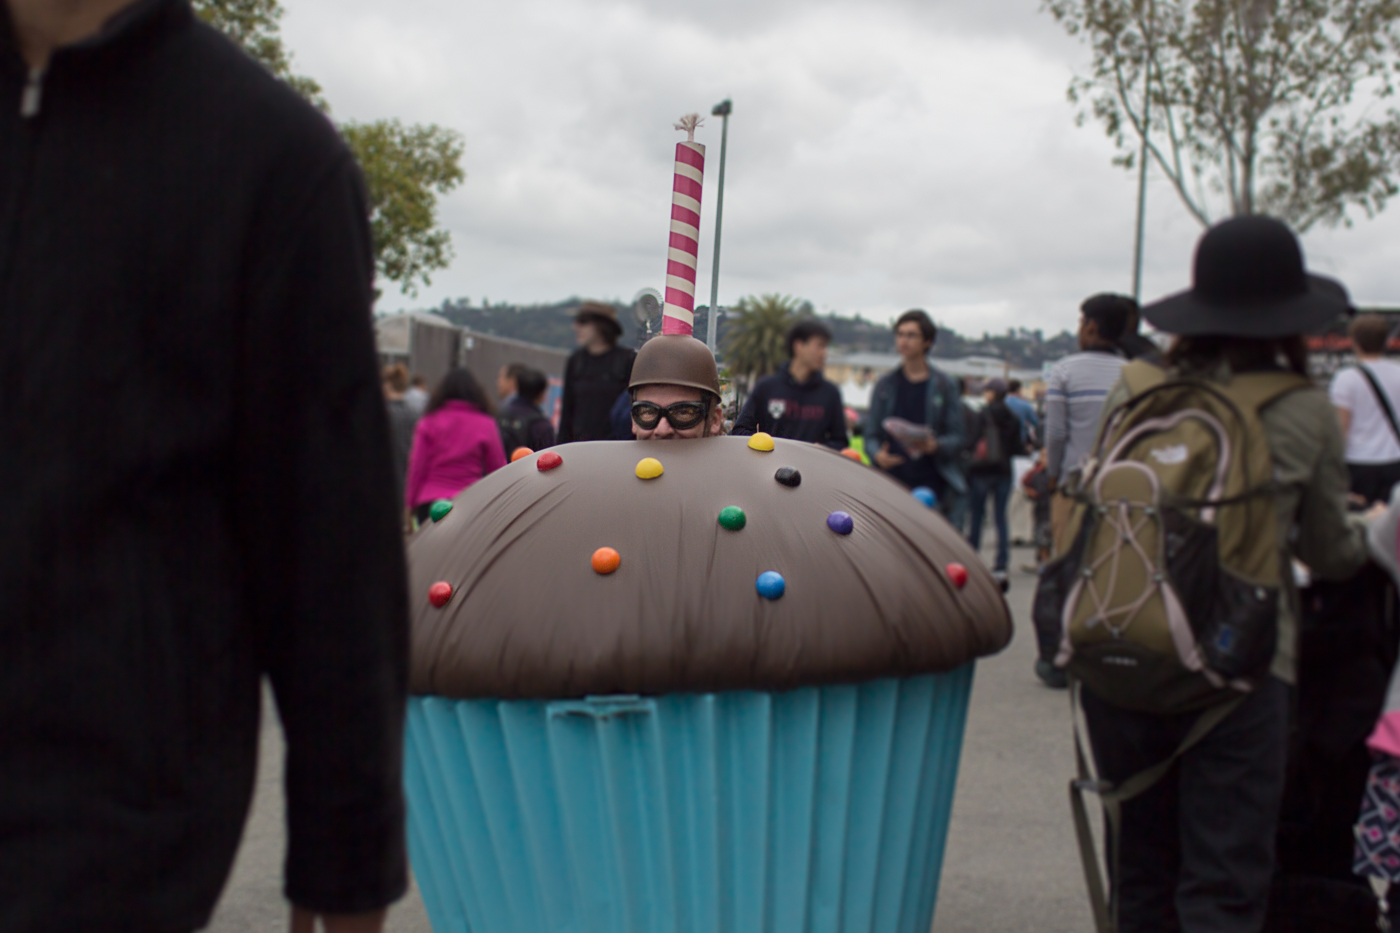 Driving Cupcakes at Maker Faire